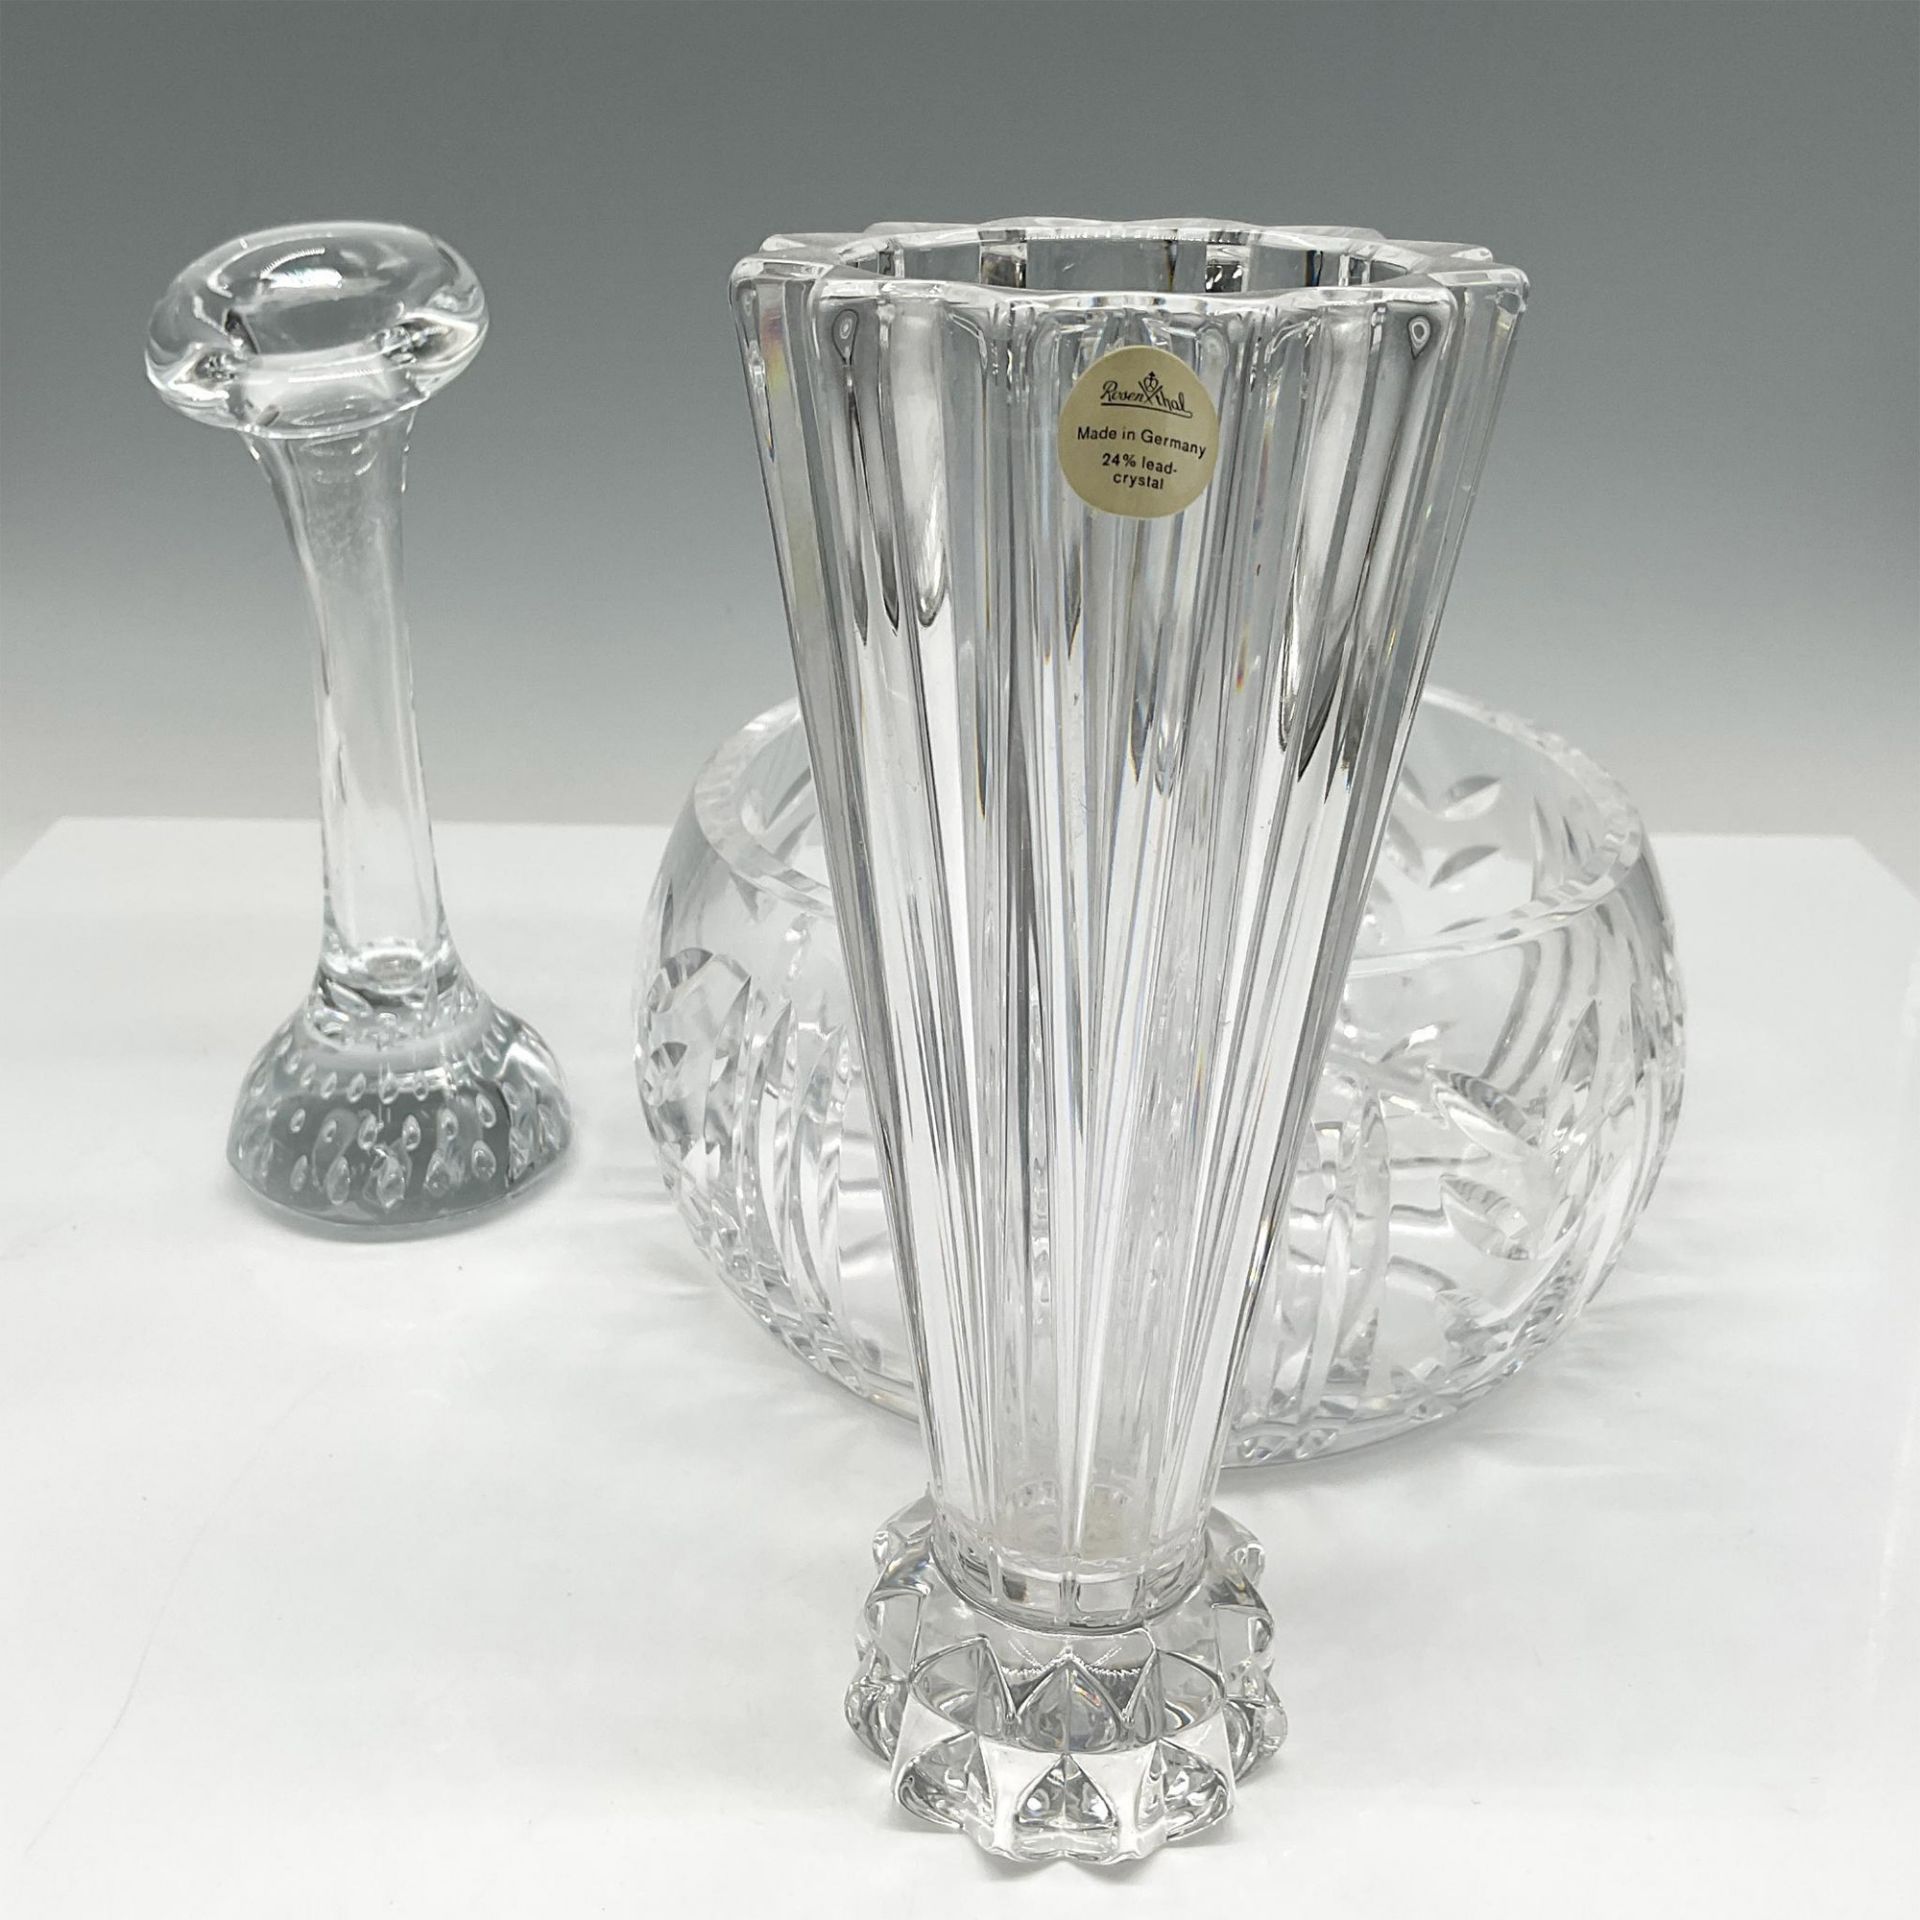 3pc Rosenthal & Pairpoint Vase + Centerpiece Crystal Bowl - Image 3 of 3